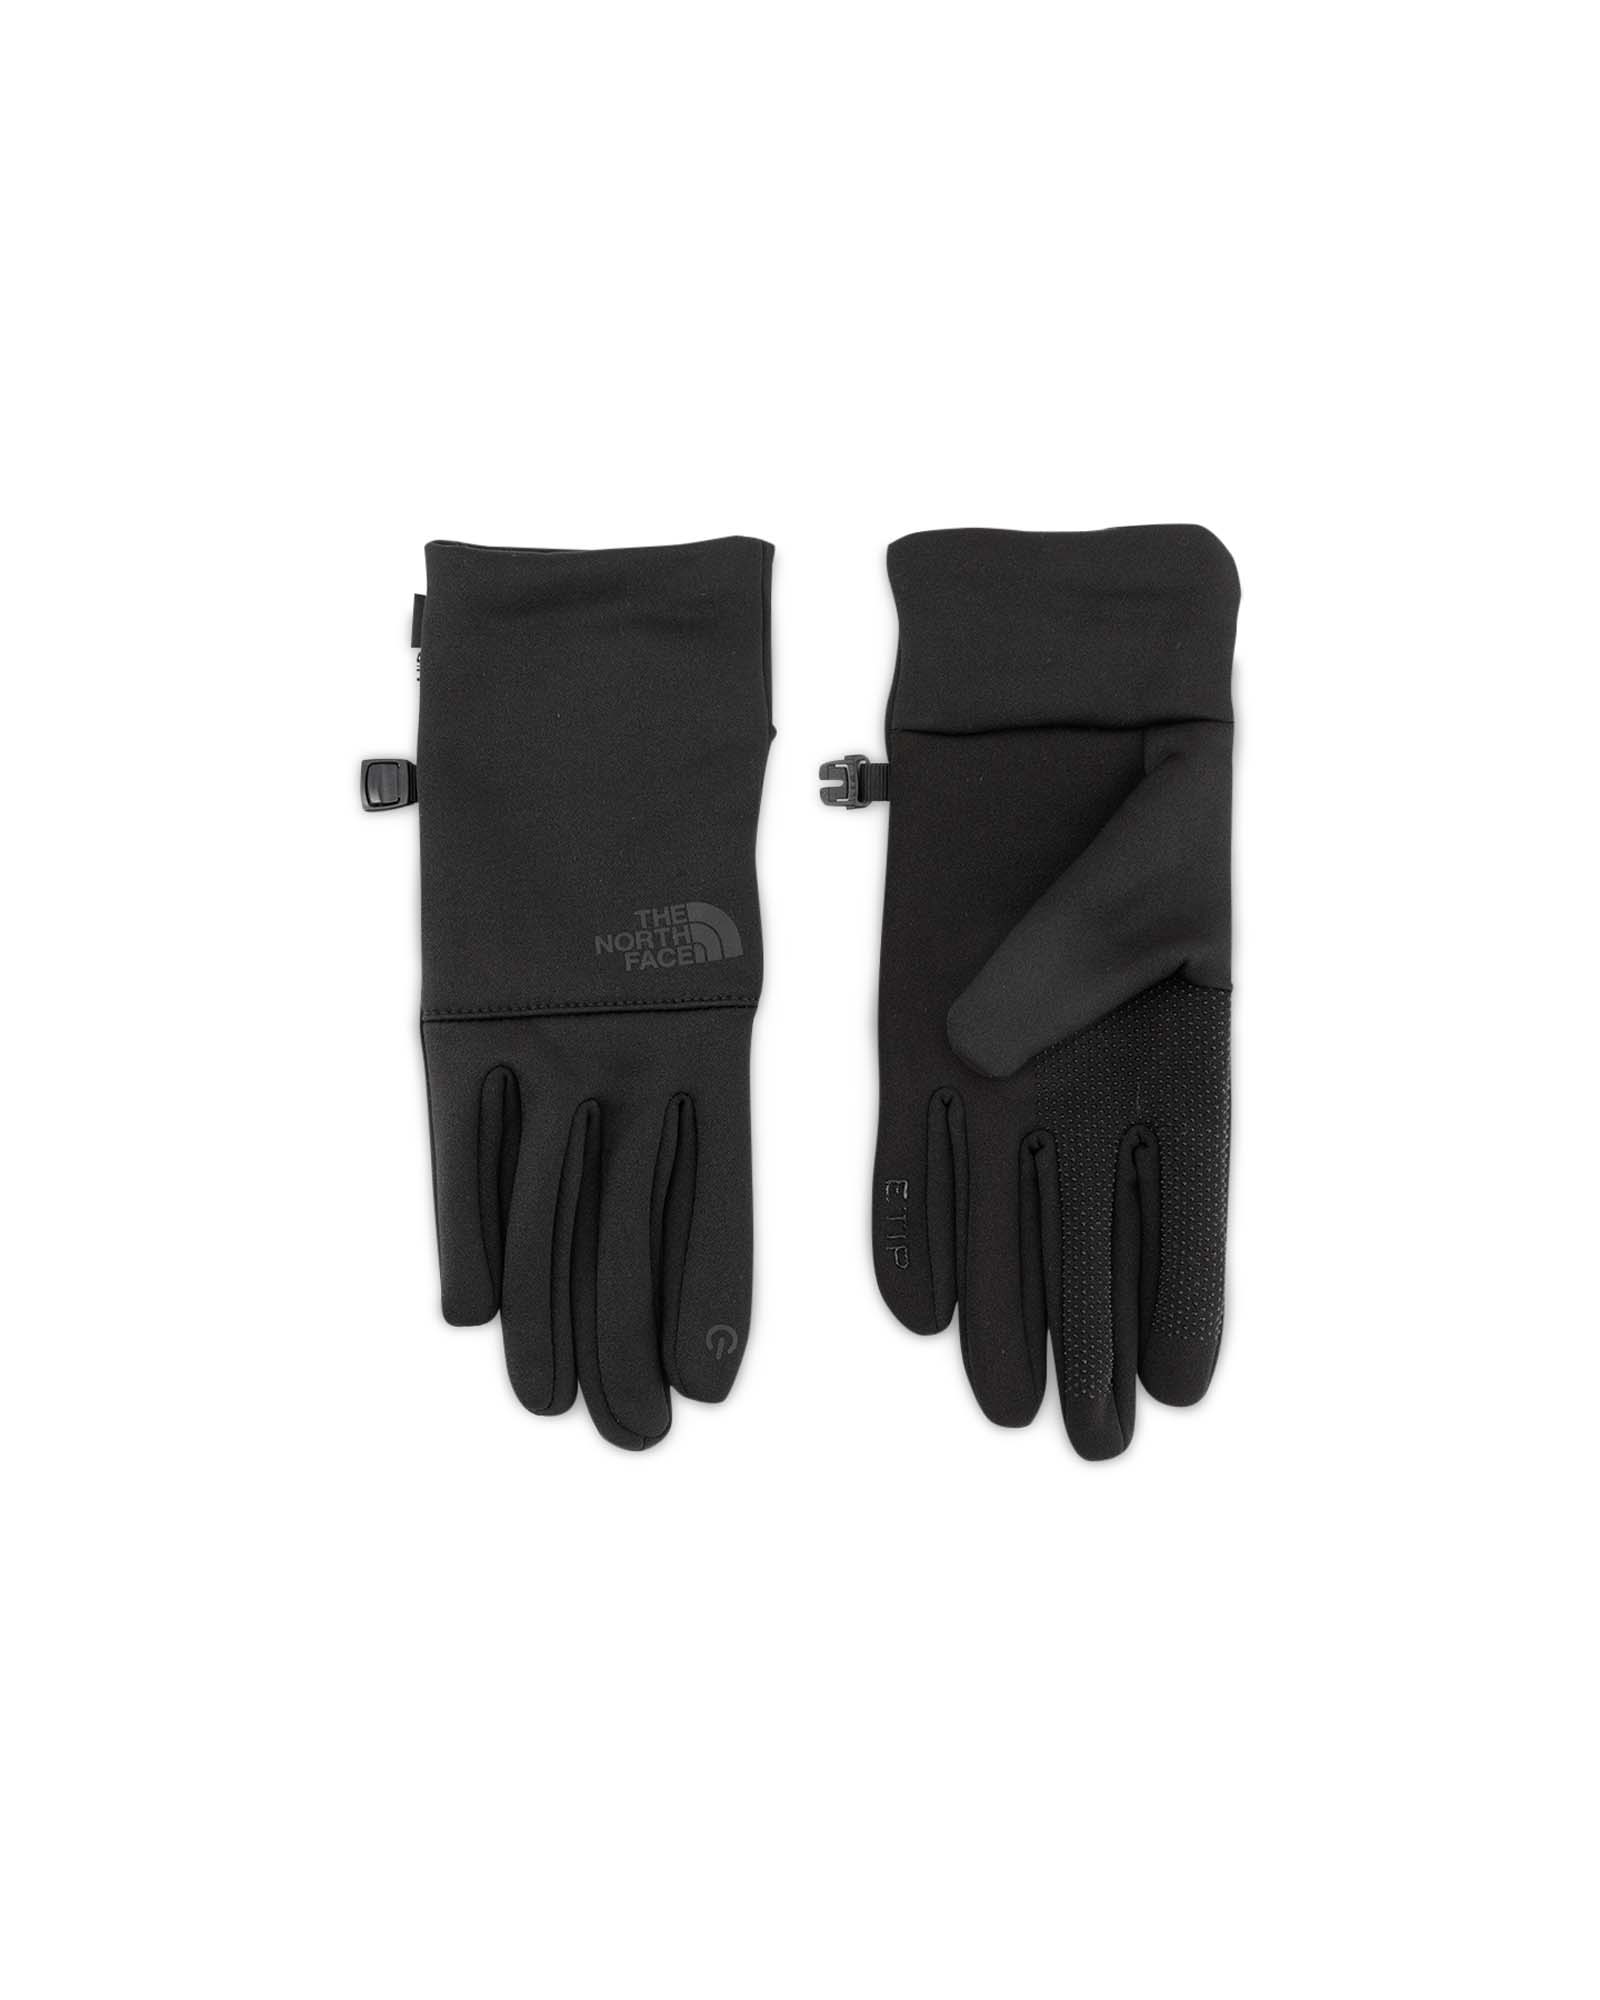 THE NORTH FACE etip recycled glove